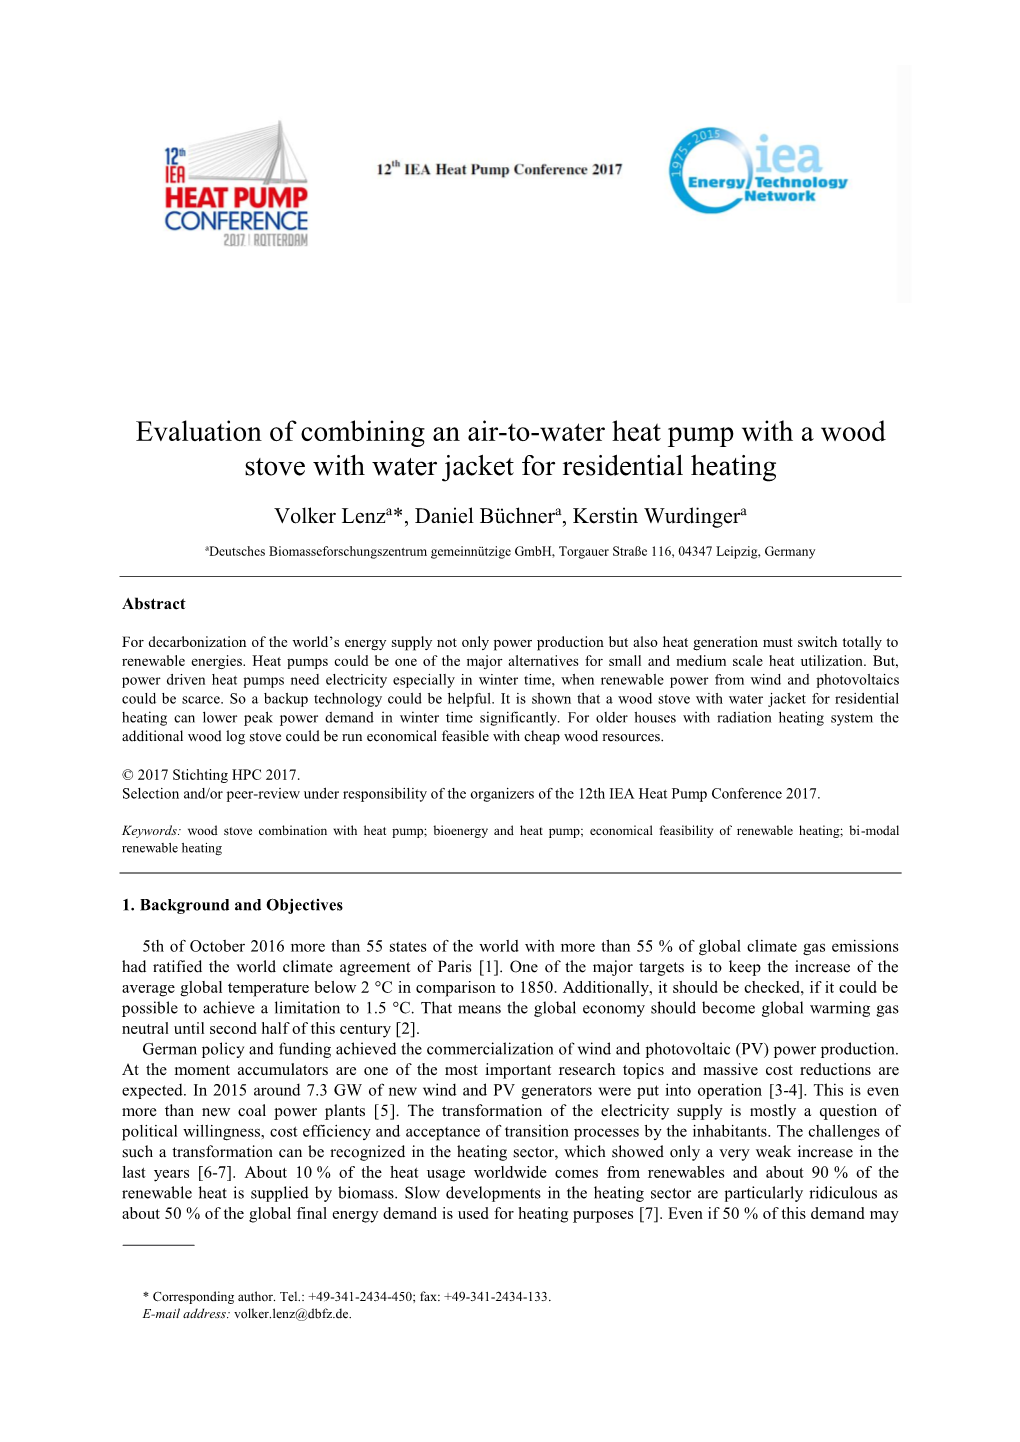 Evaluation of Combining an Air-To-Water Heat Pump with a Wood Stove with Water Jacket for Residential Heating